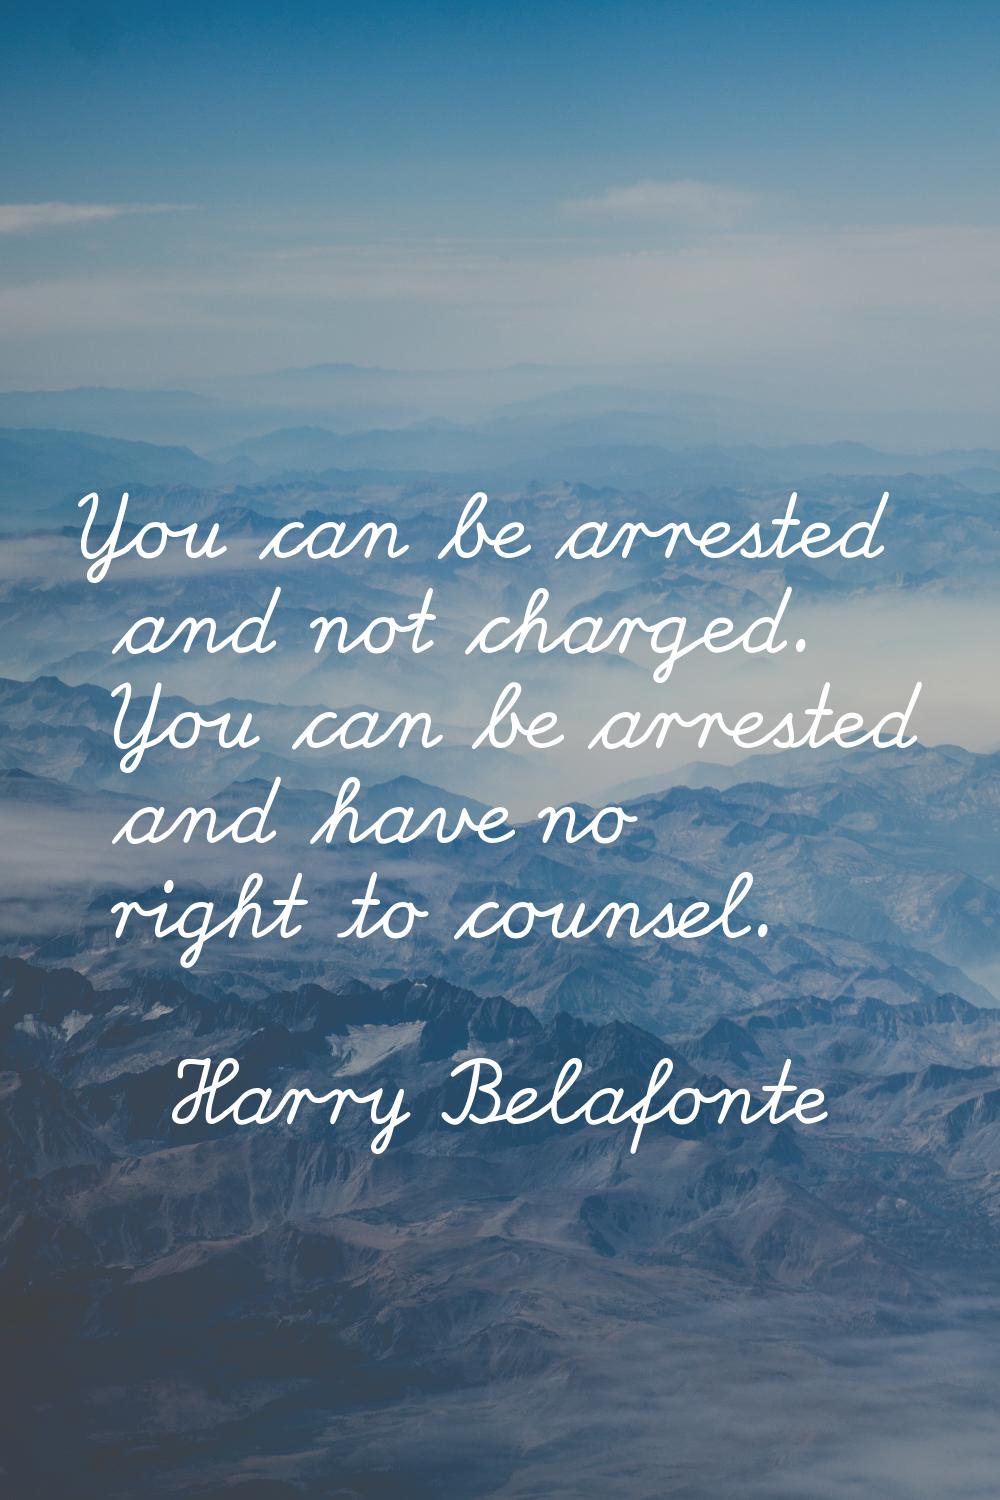 You can be arrested and not charged. You can be arrested and have no right to counsel.